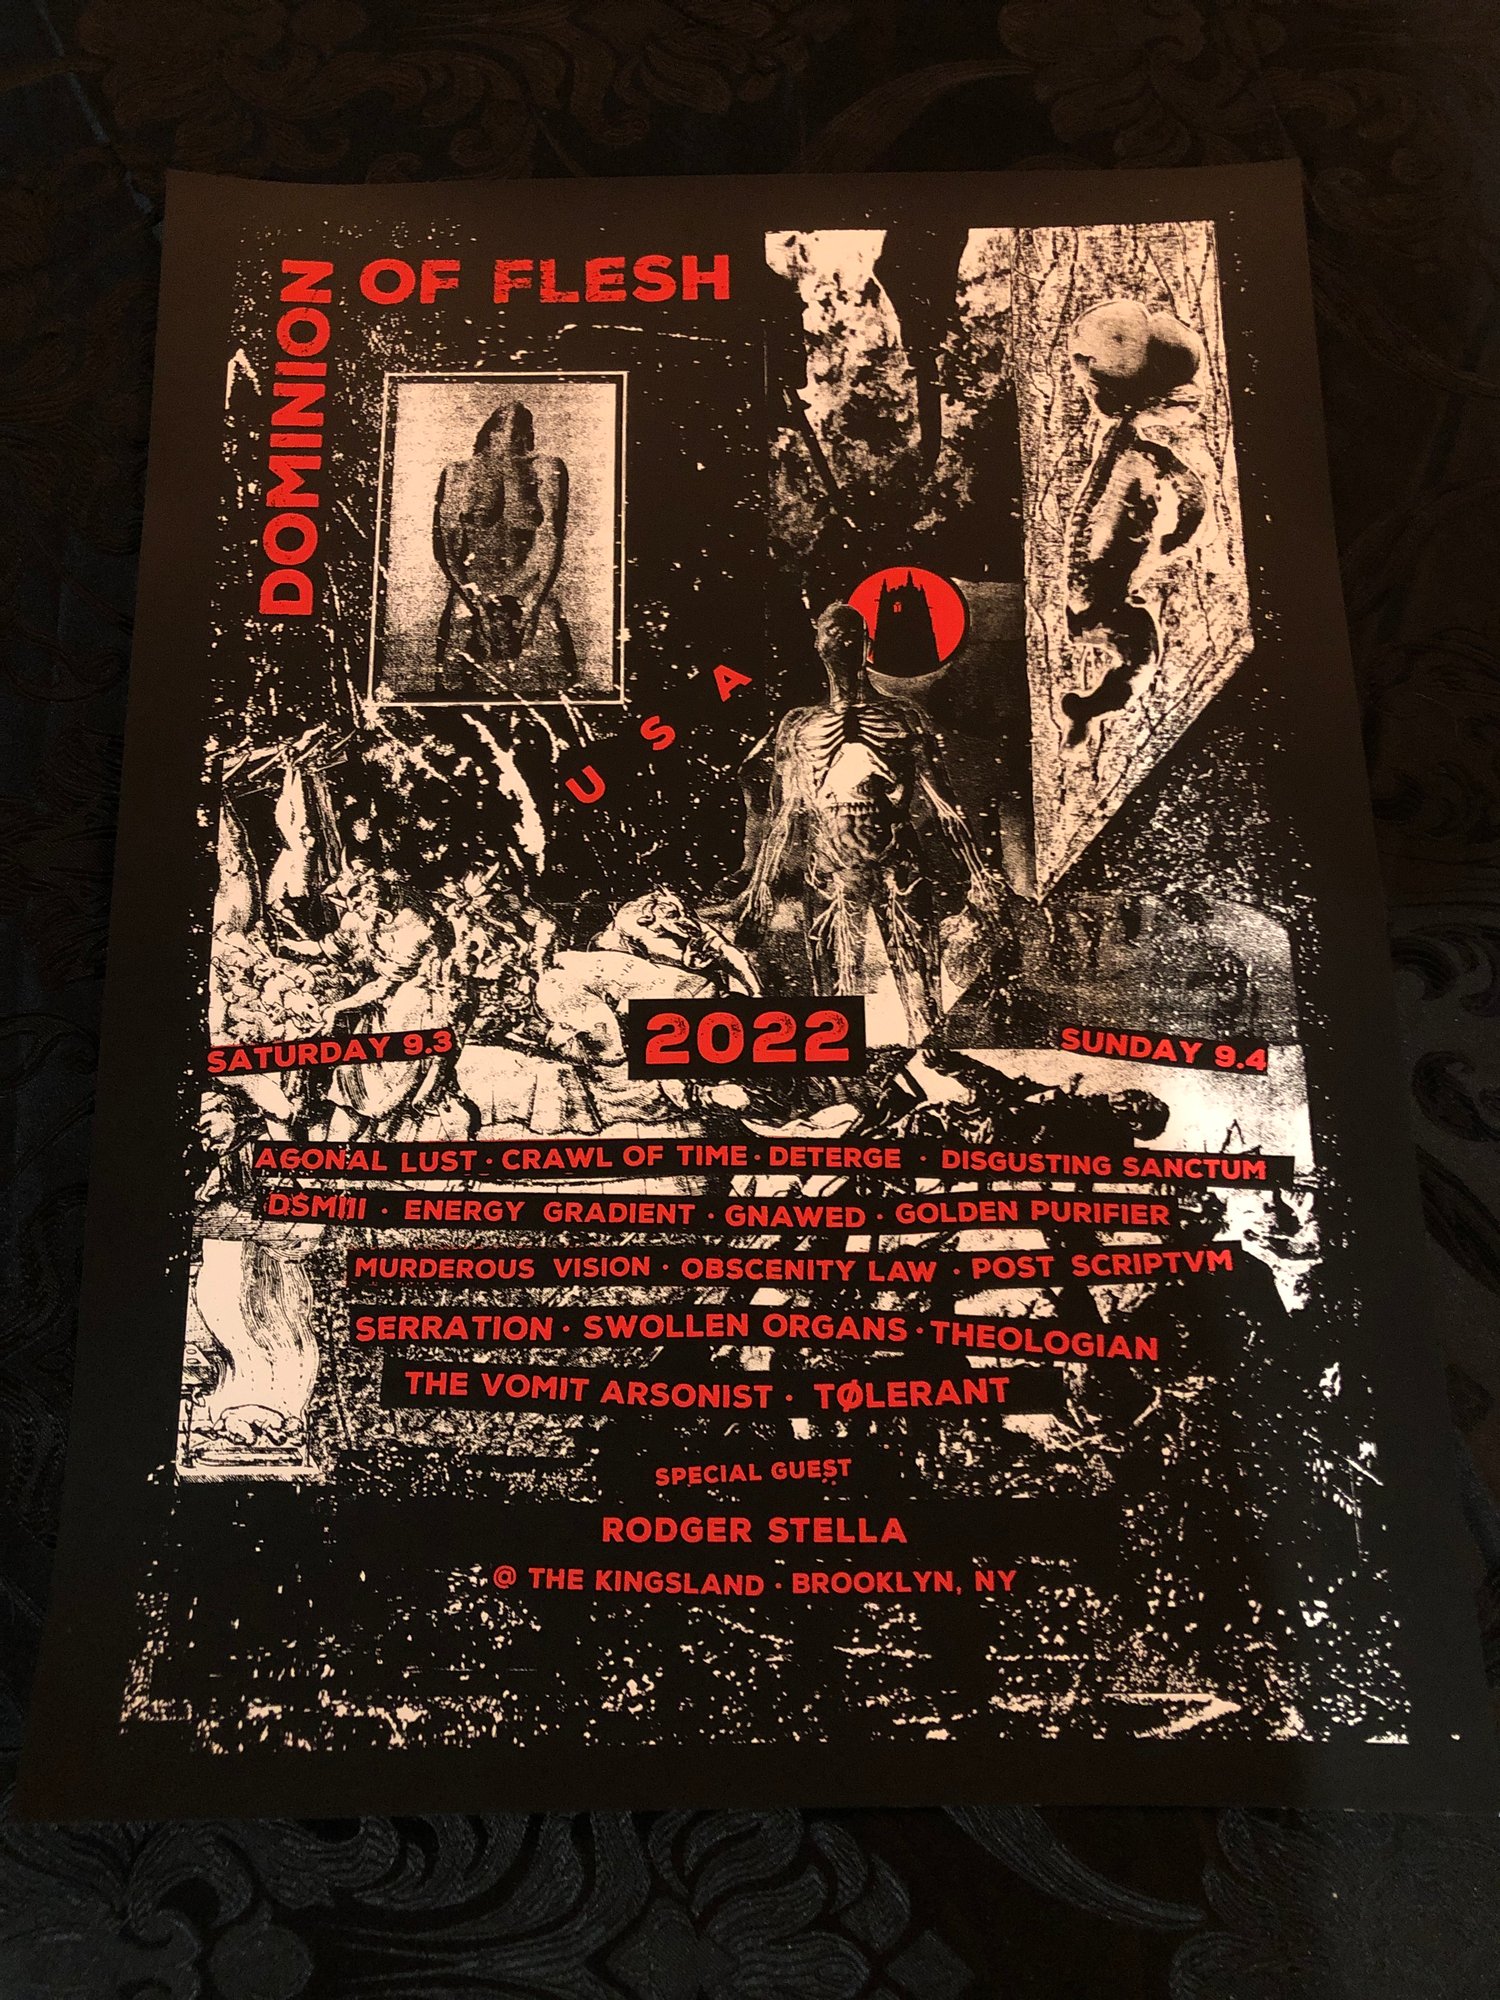 Dominion Of Flesh USA Screen-printed Poster